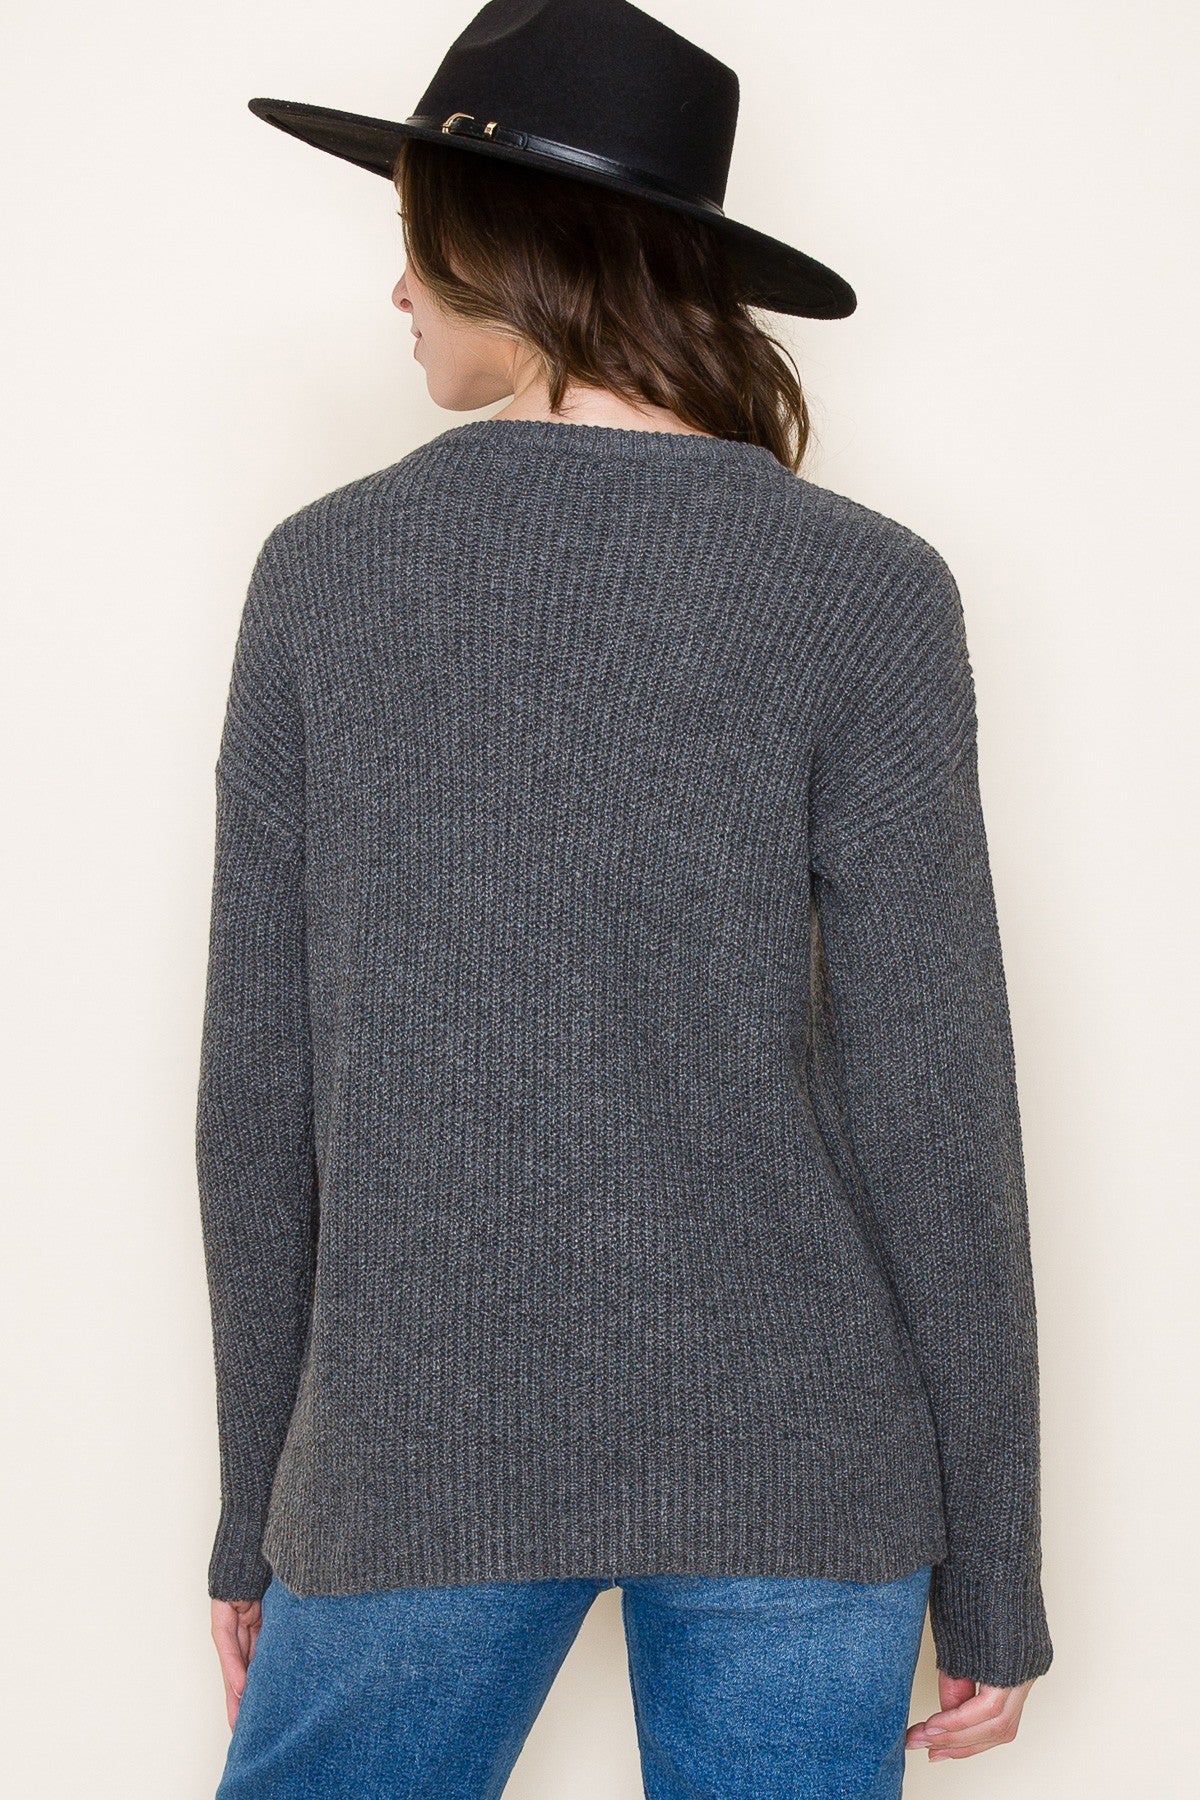 Marry Basic Marled Pullover Sweater | Charcoal back